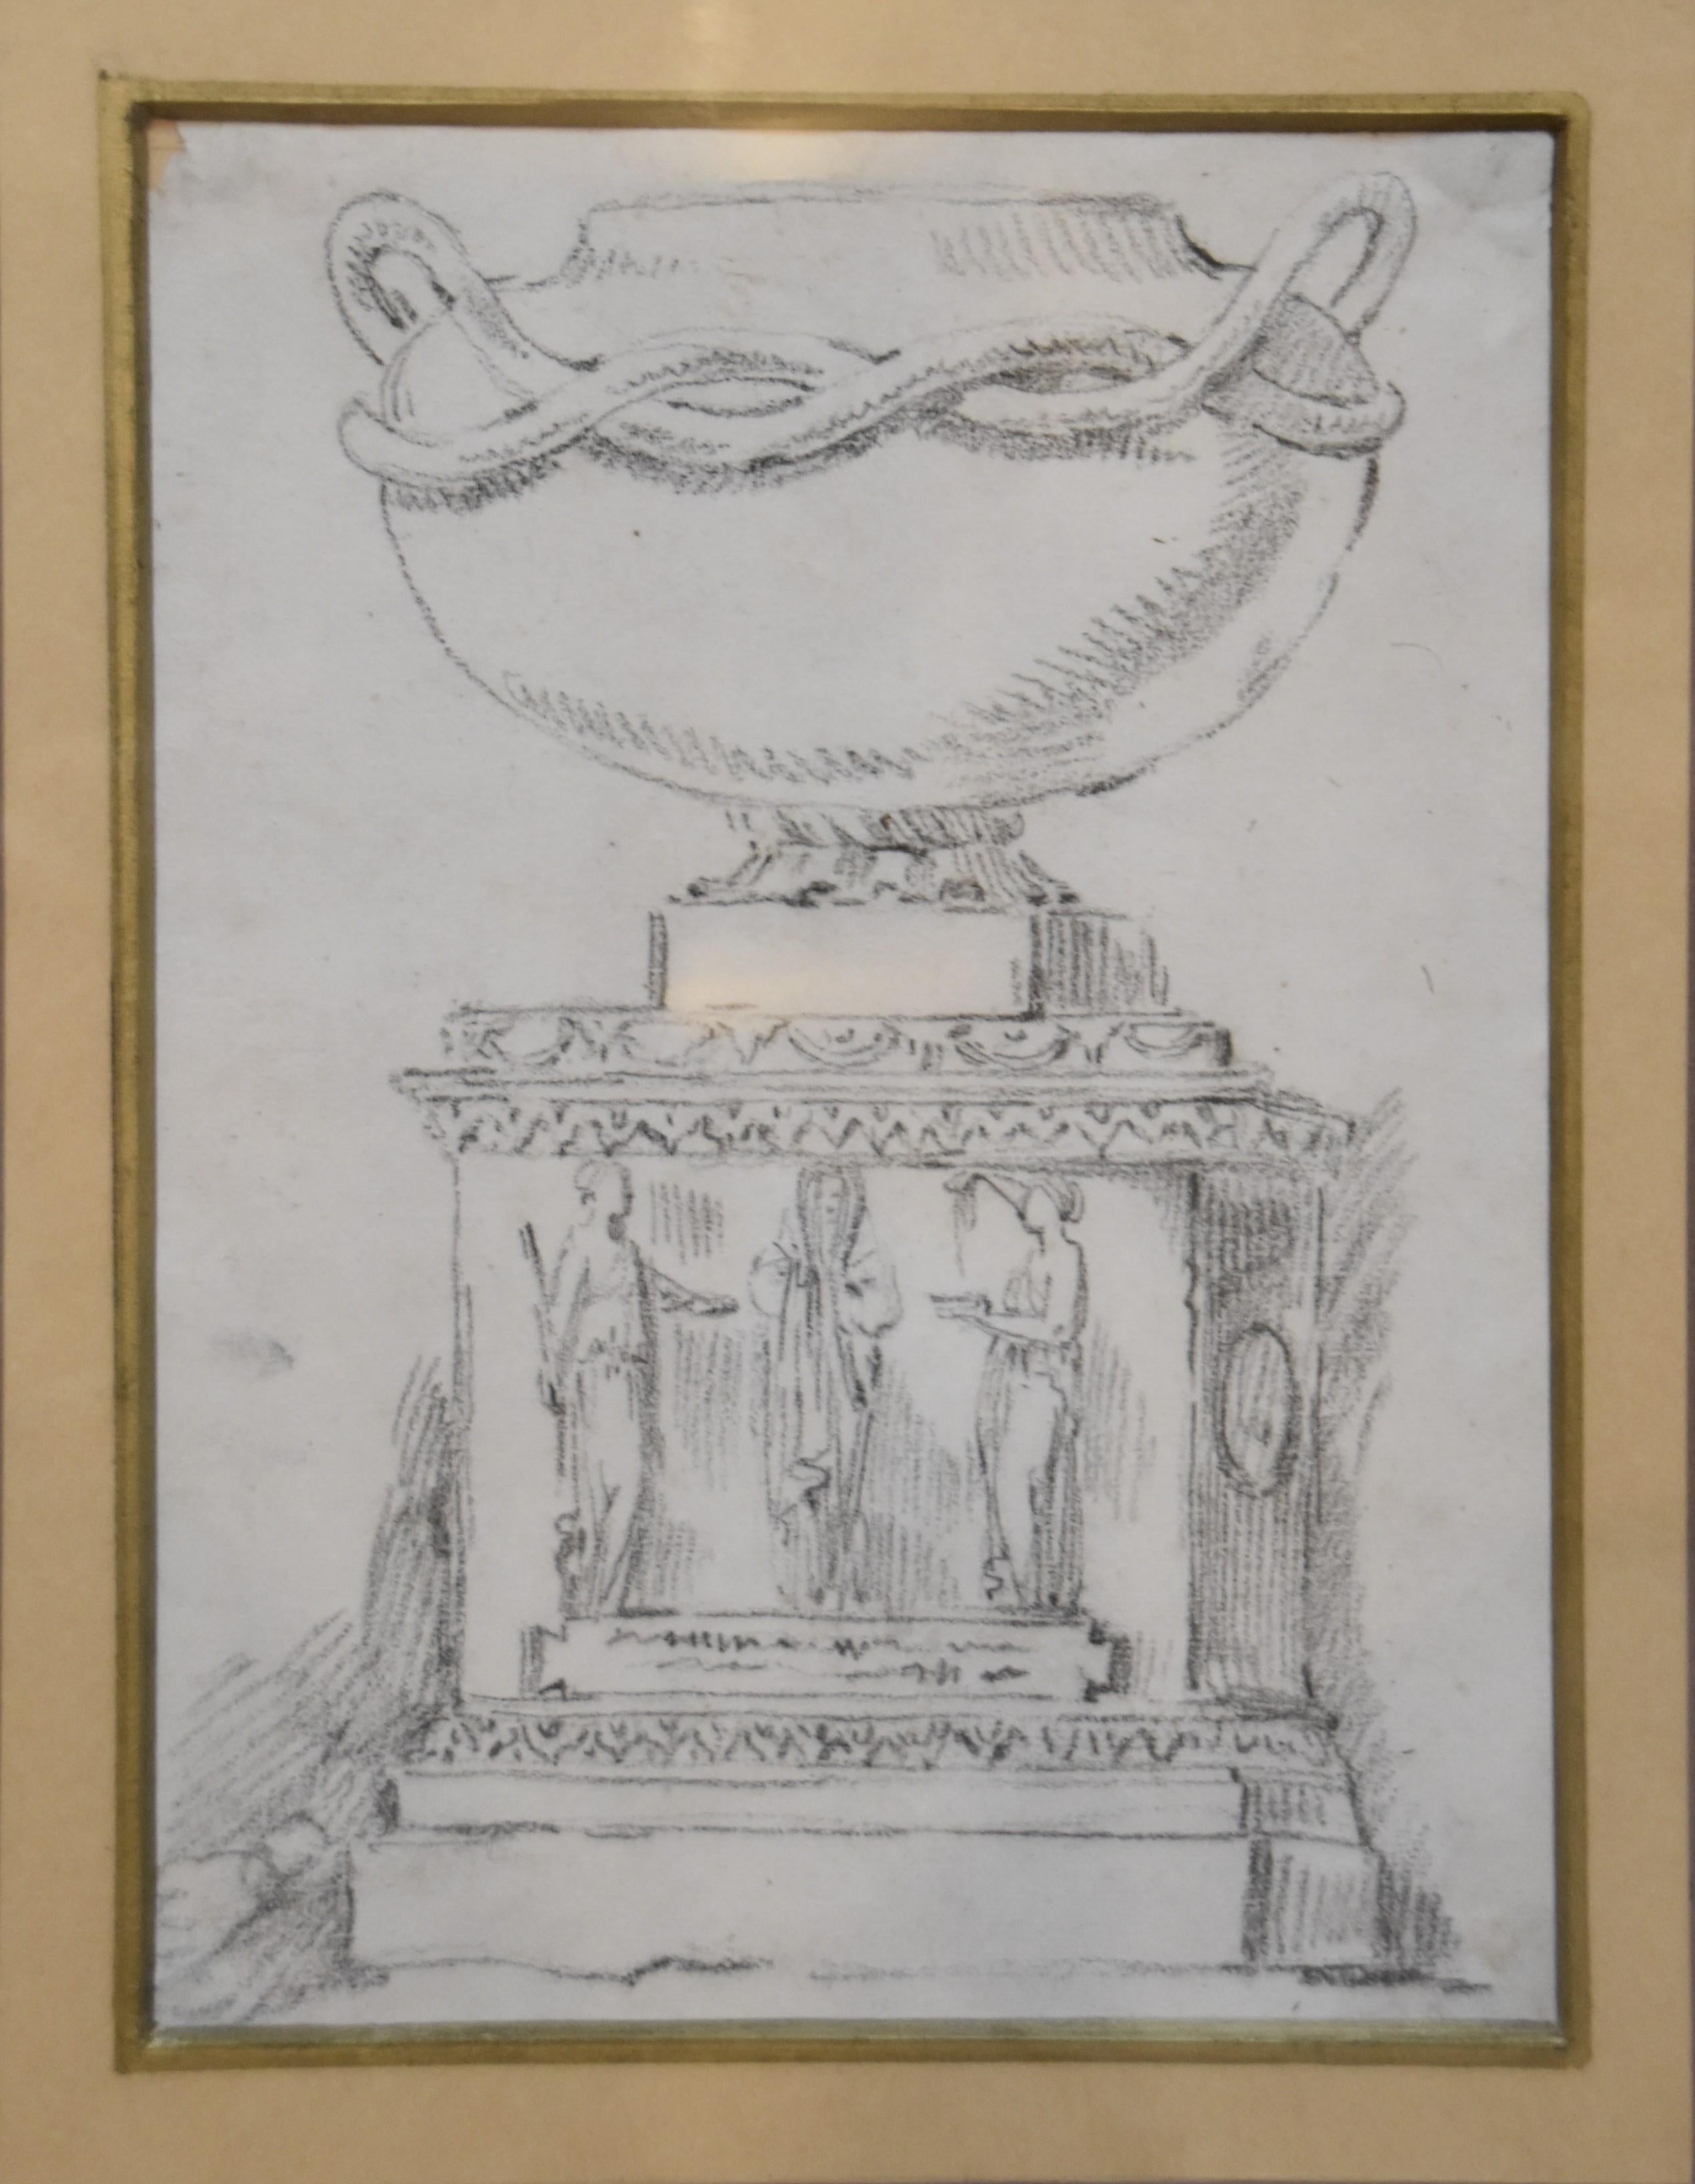 Anicet-Charles-Gabriel Lemonnier (1743-1824) Study of an antique vase, drawing - Old Masters Art by Anicet Charles Gabriel Lemonnier